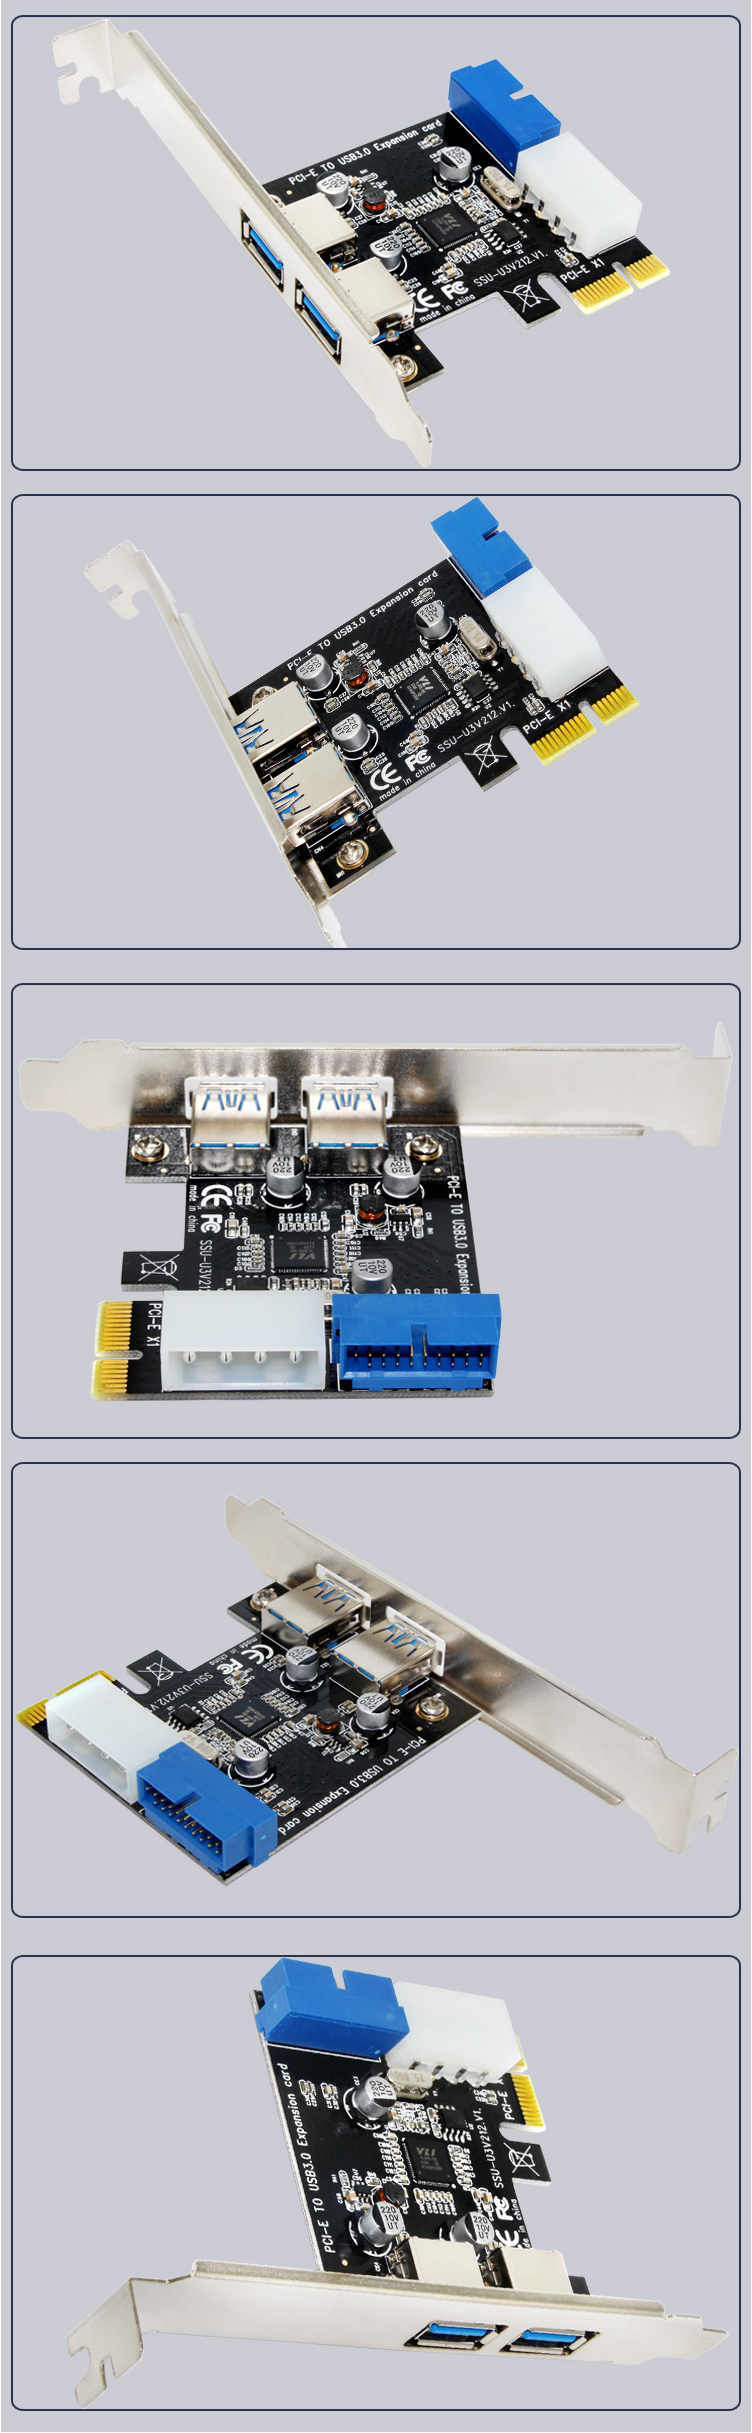 SSU-V212-PCI-E-to-USB-30-Desktop-Computer-Expansion-Card-With-Front-20-Pin-Interface-1534916